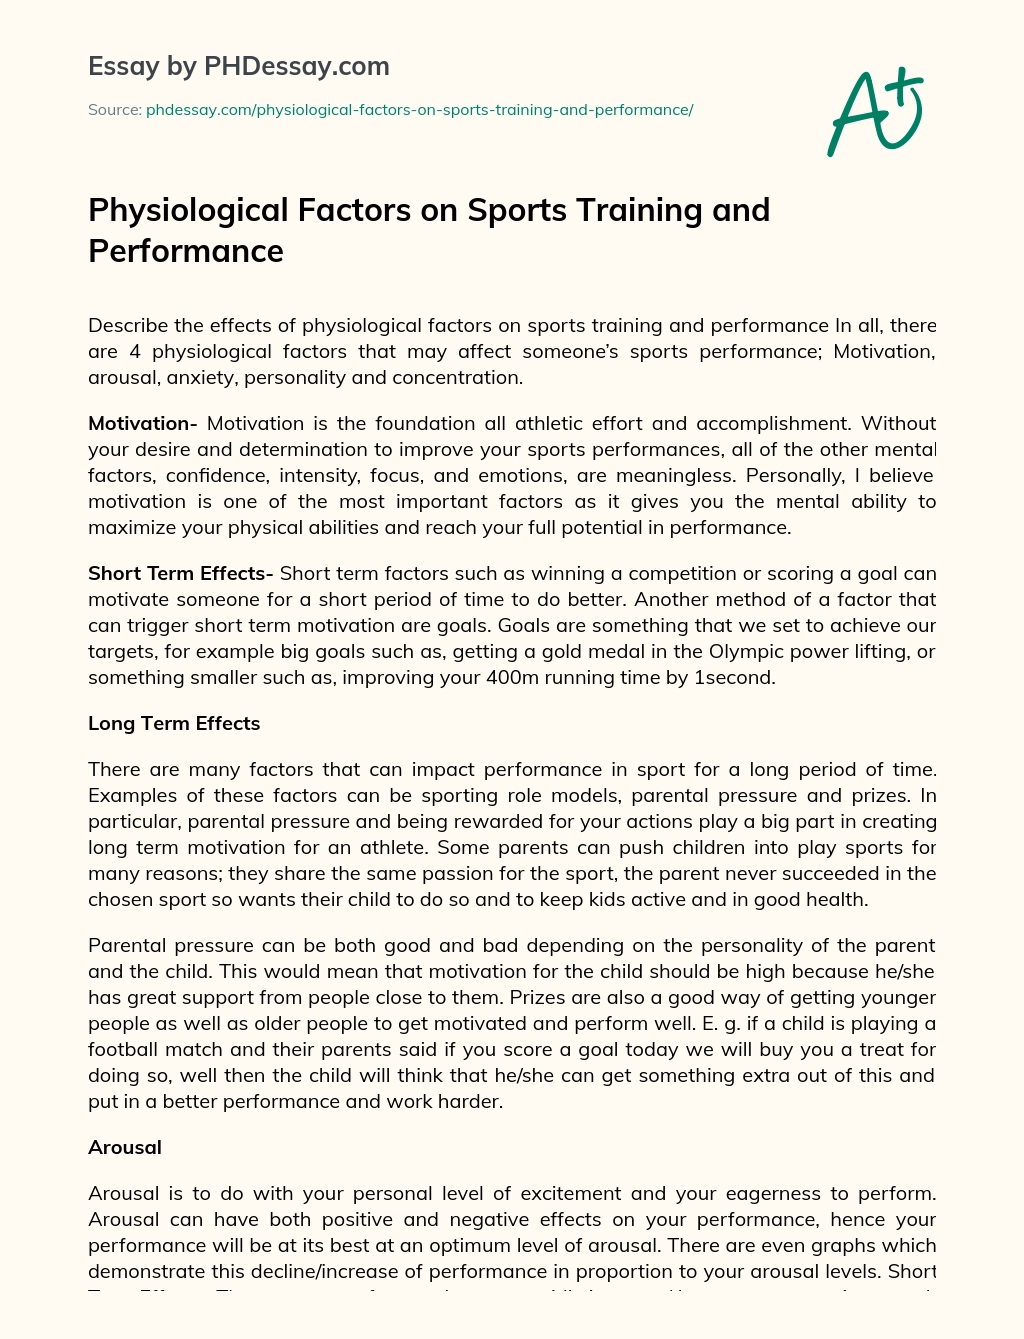 Physiological Factors on Sports Training and Performance essay